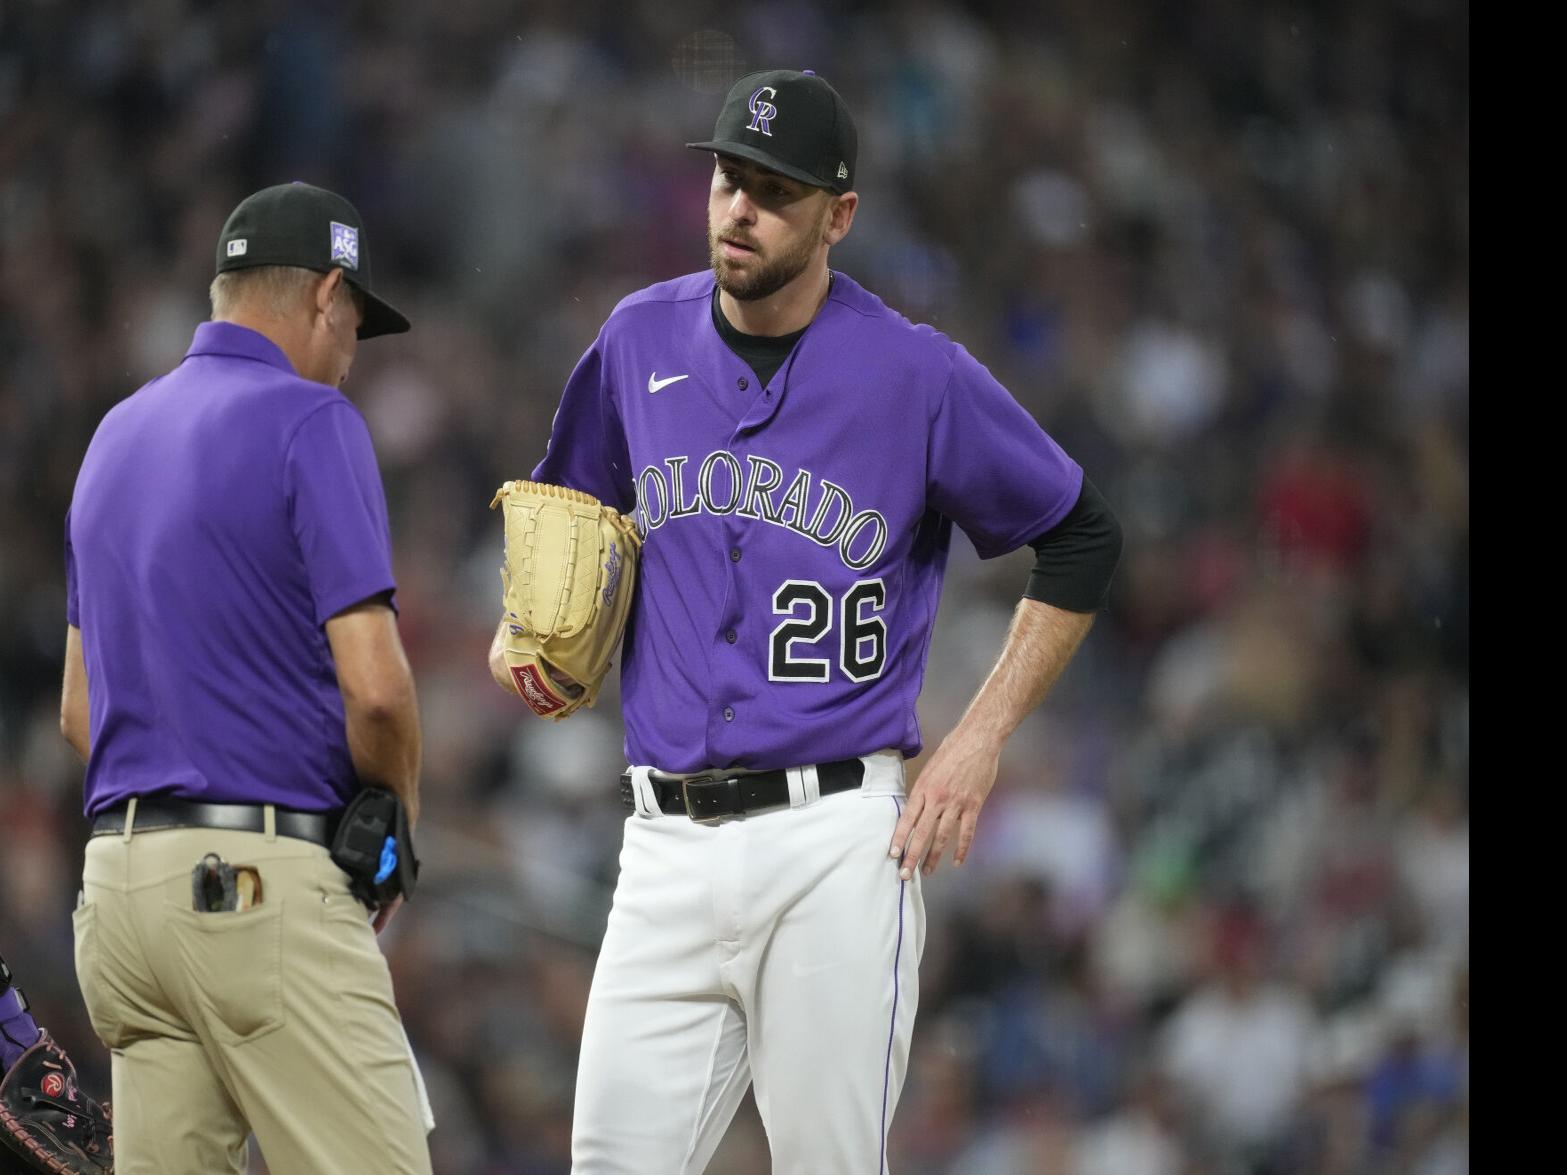 Rockies lose 6-5 to Nationals, waste Austin Gomber's strong start